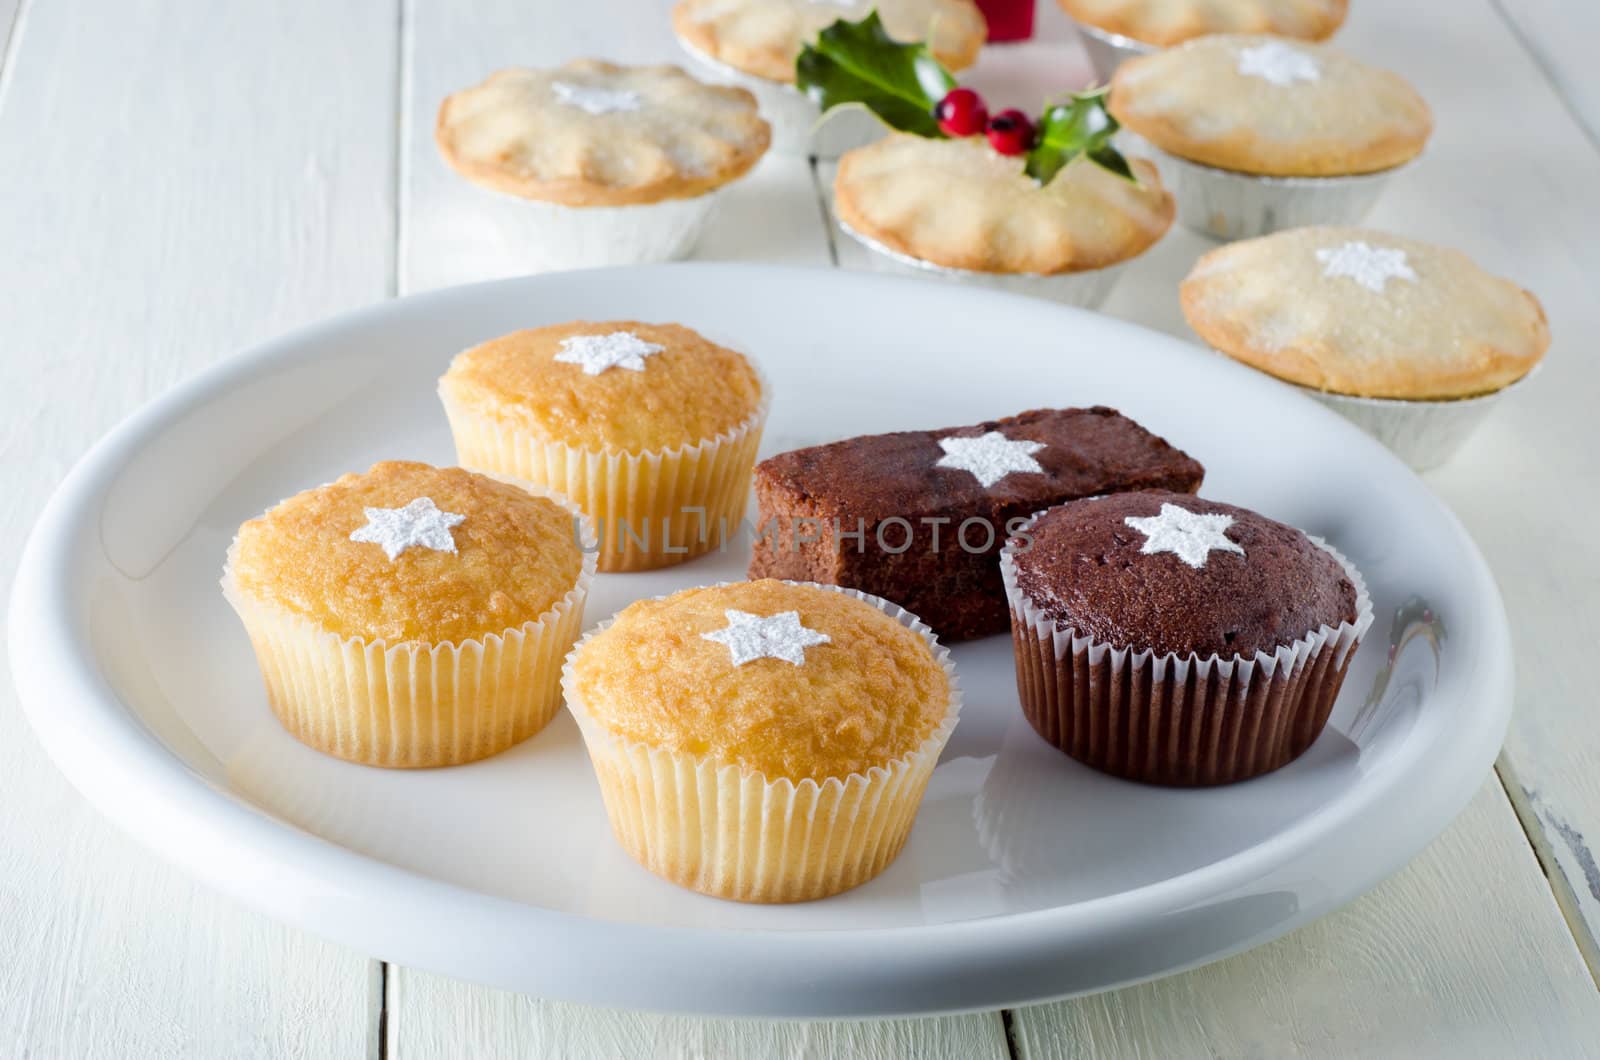 Christmas Cupcakes and Mince Pies by frannyanne